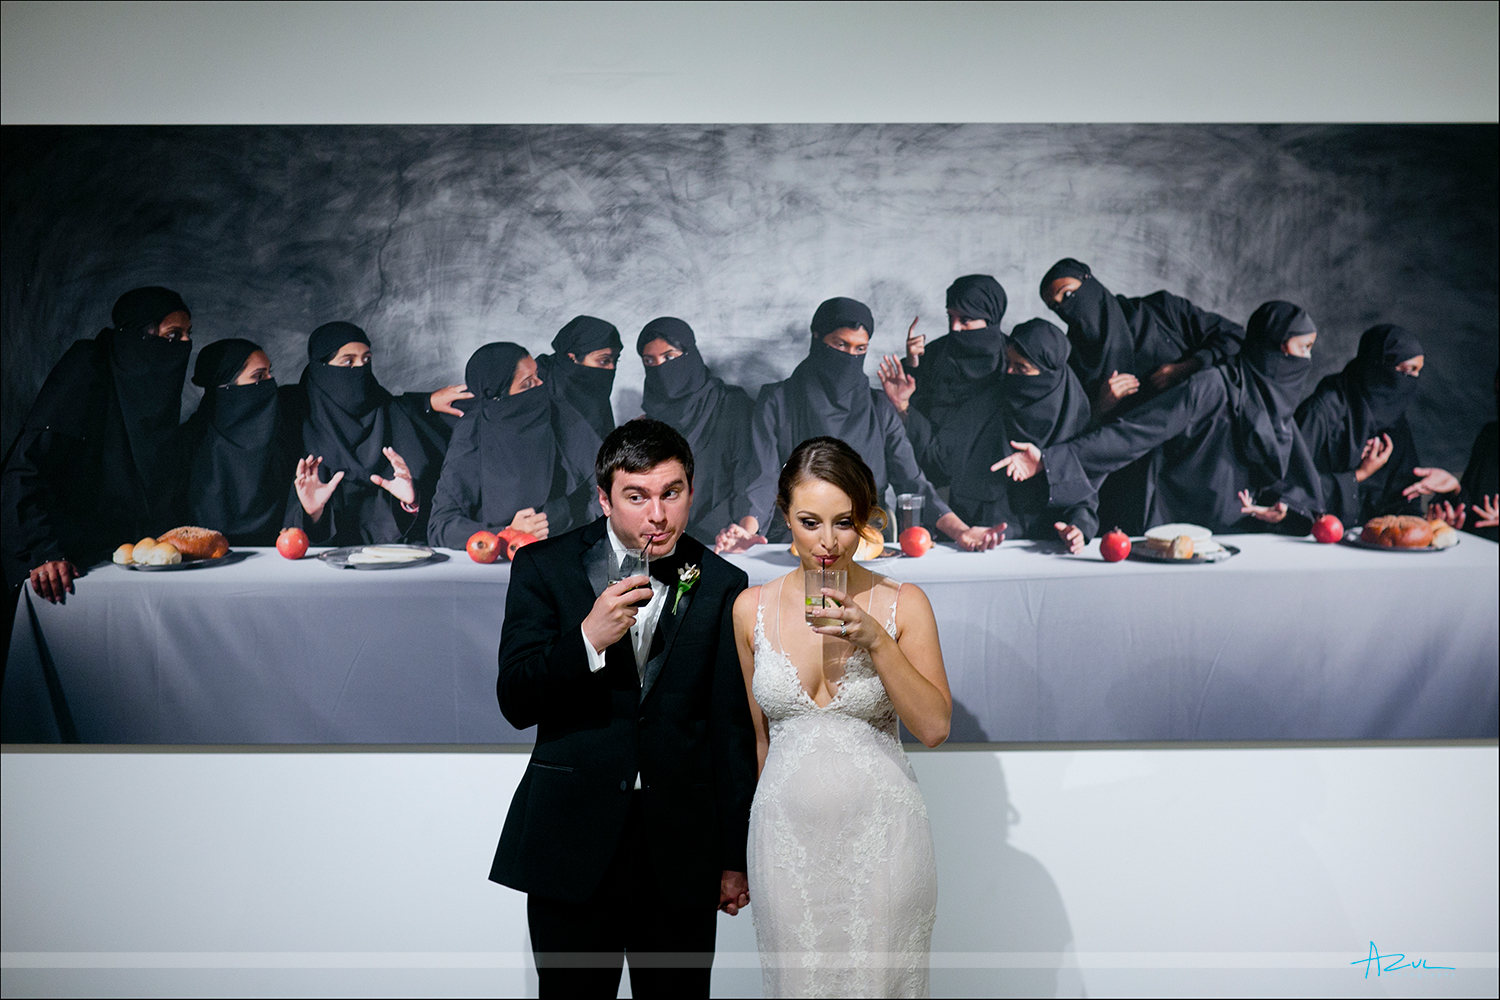 Fun wedding day B&G portrait with museum art while at 21c Museum & Hotel in Durham